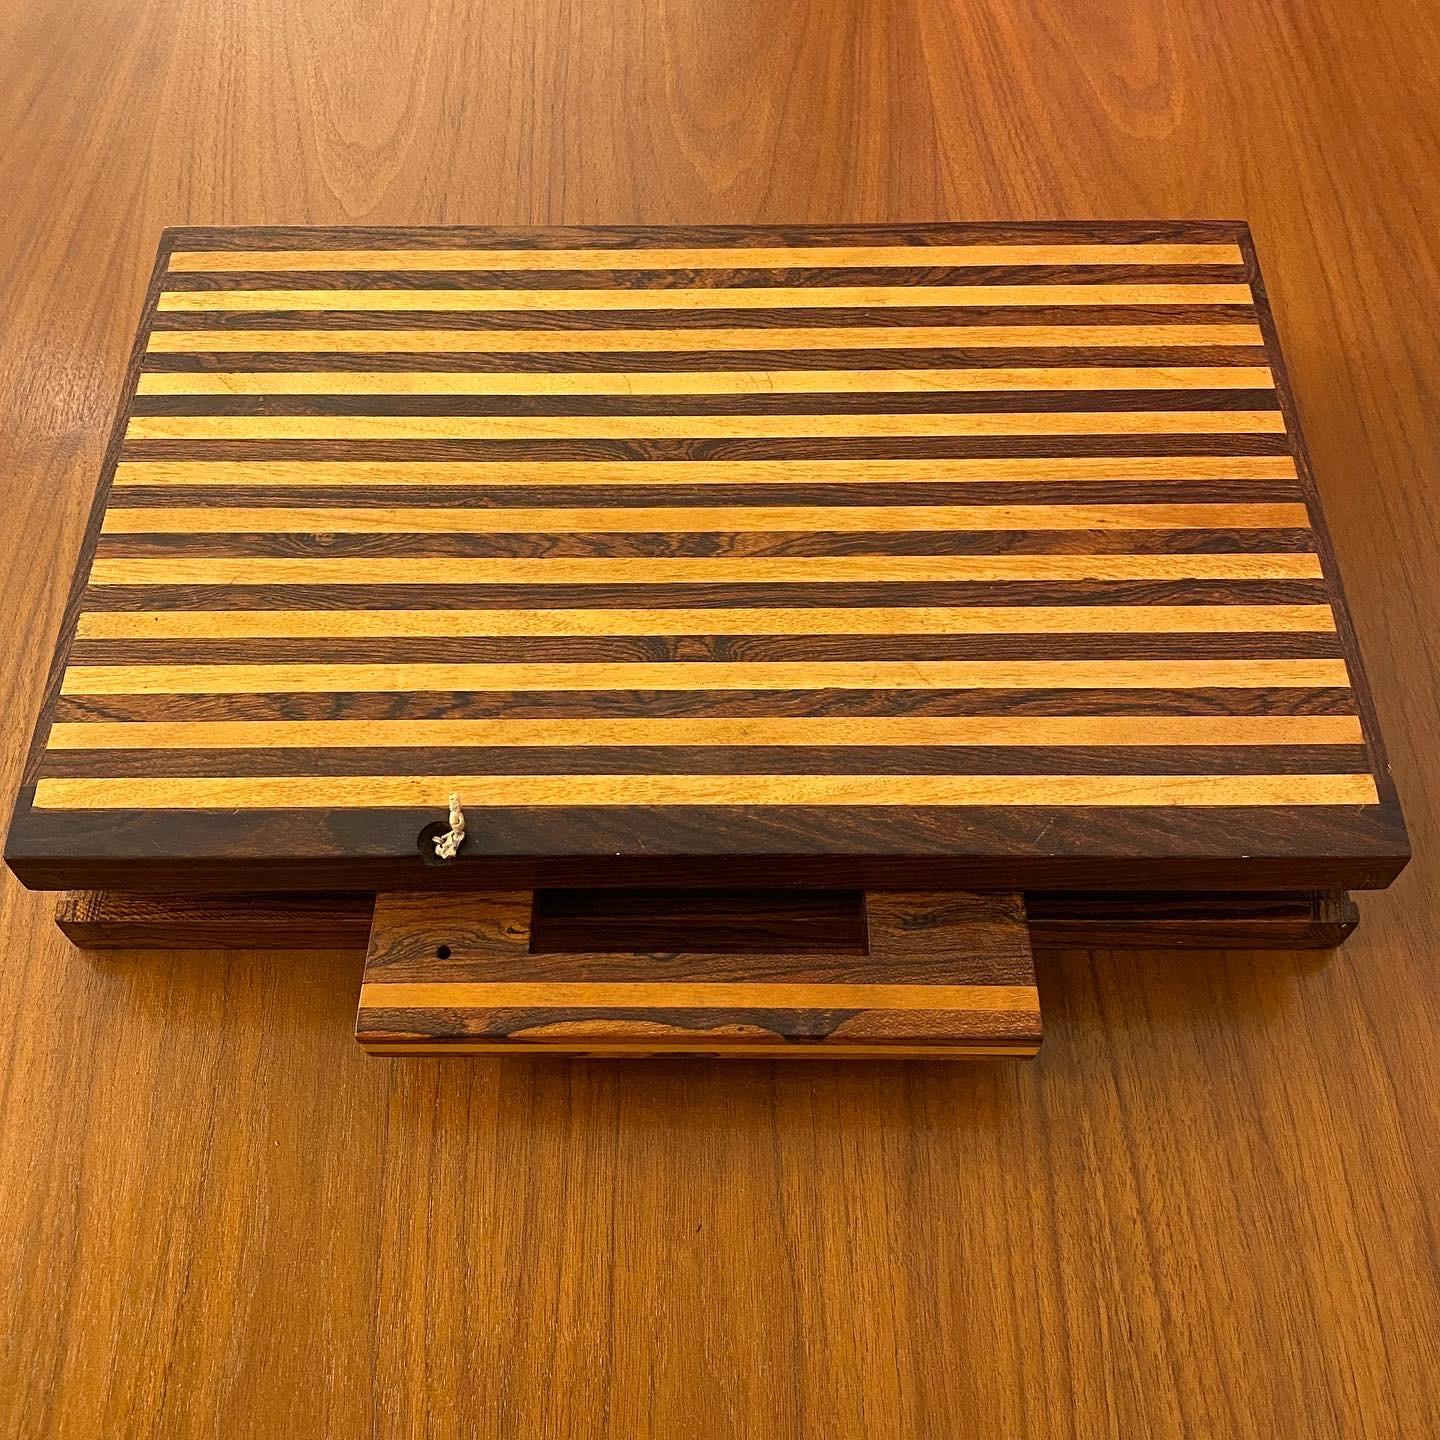 Don S. Shoemaker for Señal, S.A. Mexico portable backgammon set made of beautiful hardwoods with marquetry inlay on the interior board. The set is complete and includes the carrying case with removable handle, the interior game board, 15 off-white